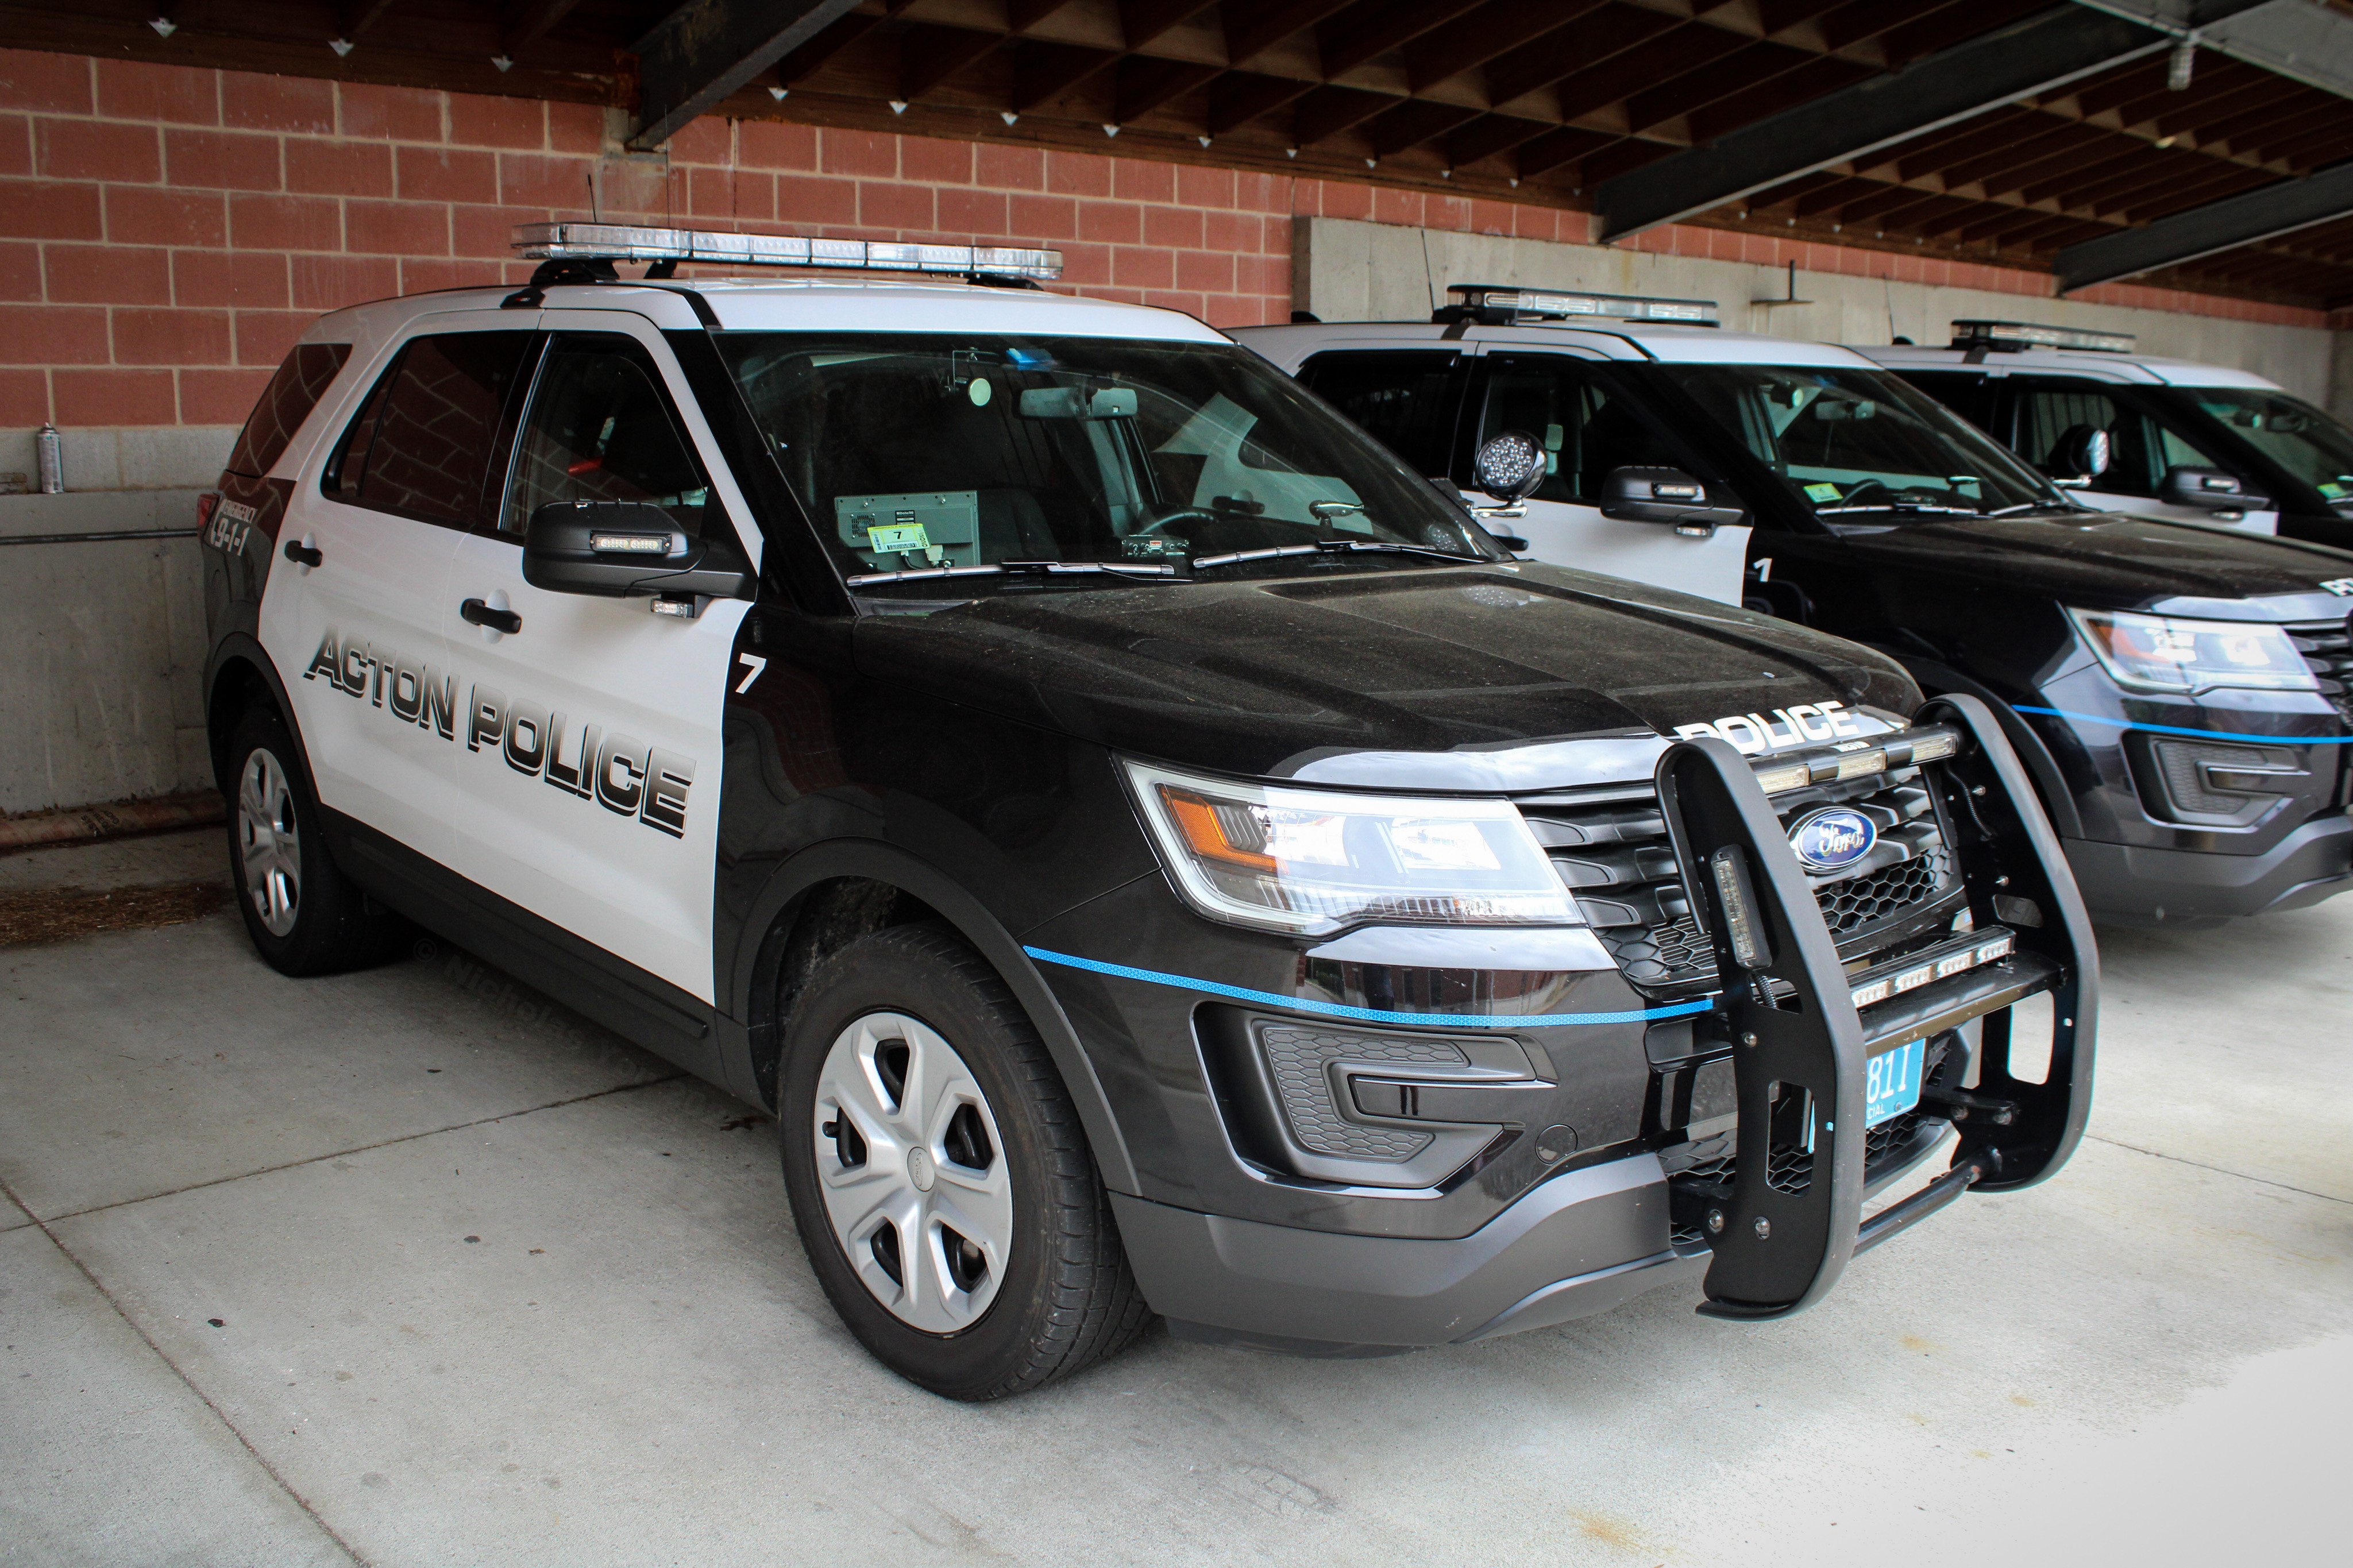 A photo  of Acton Police
            Car 7, a 2016-2019 Ford Police Interceptor Utility             taken by Nicholas You